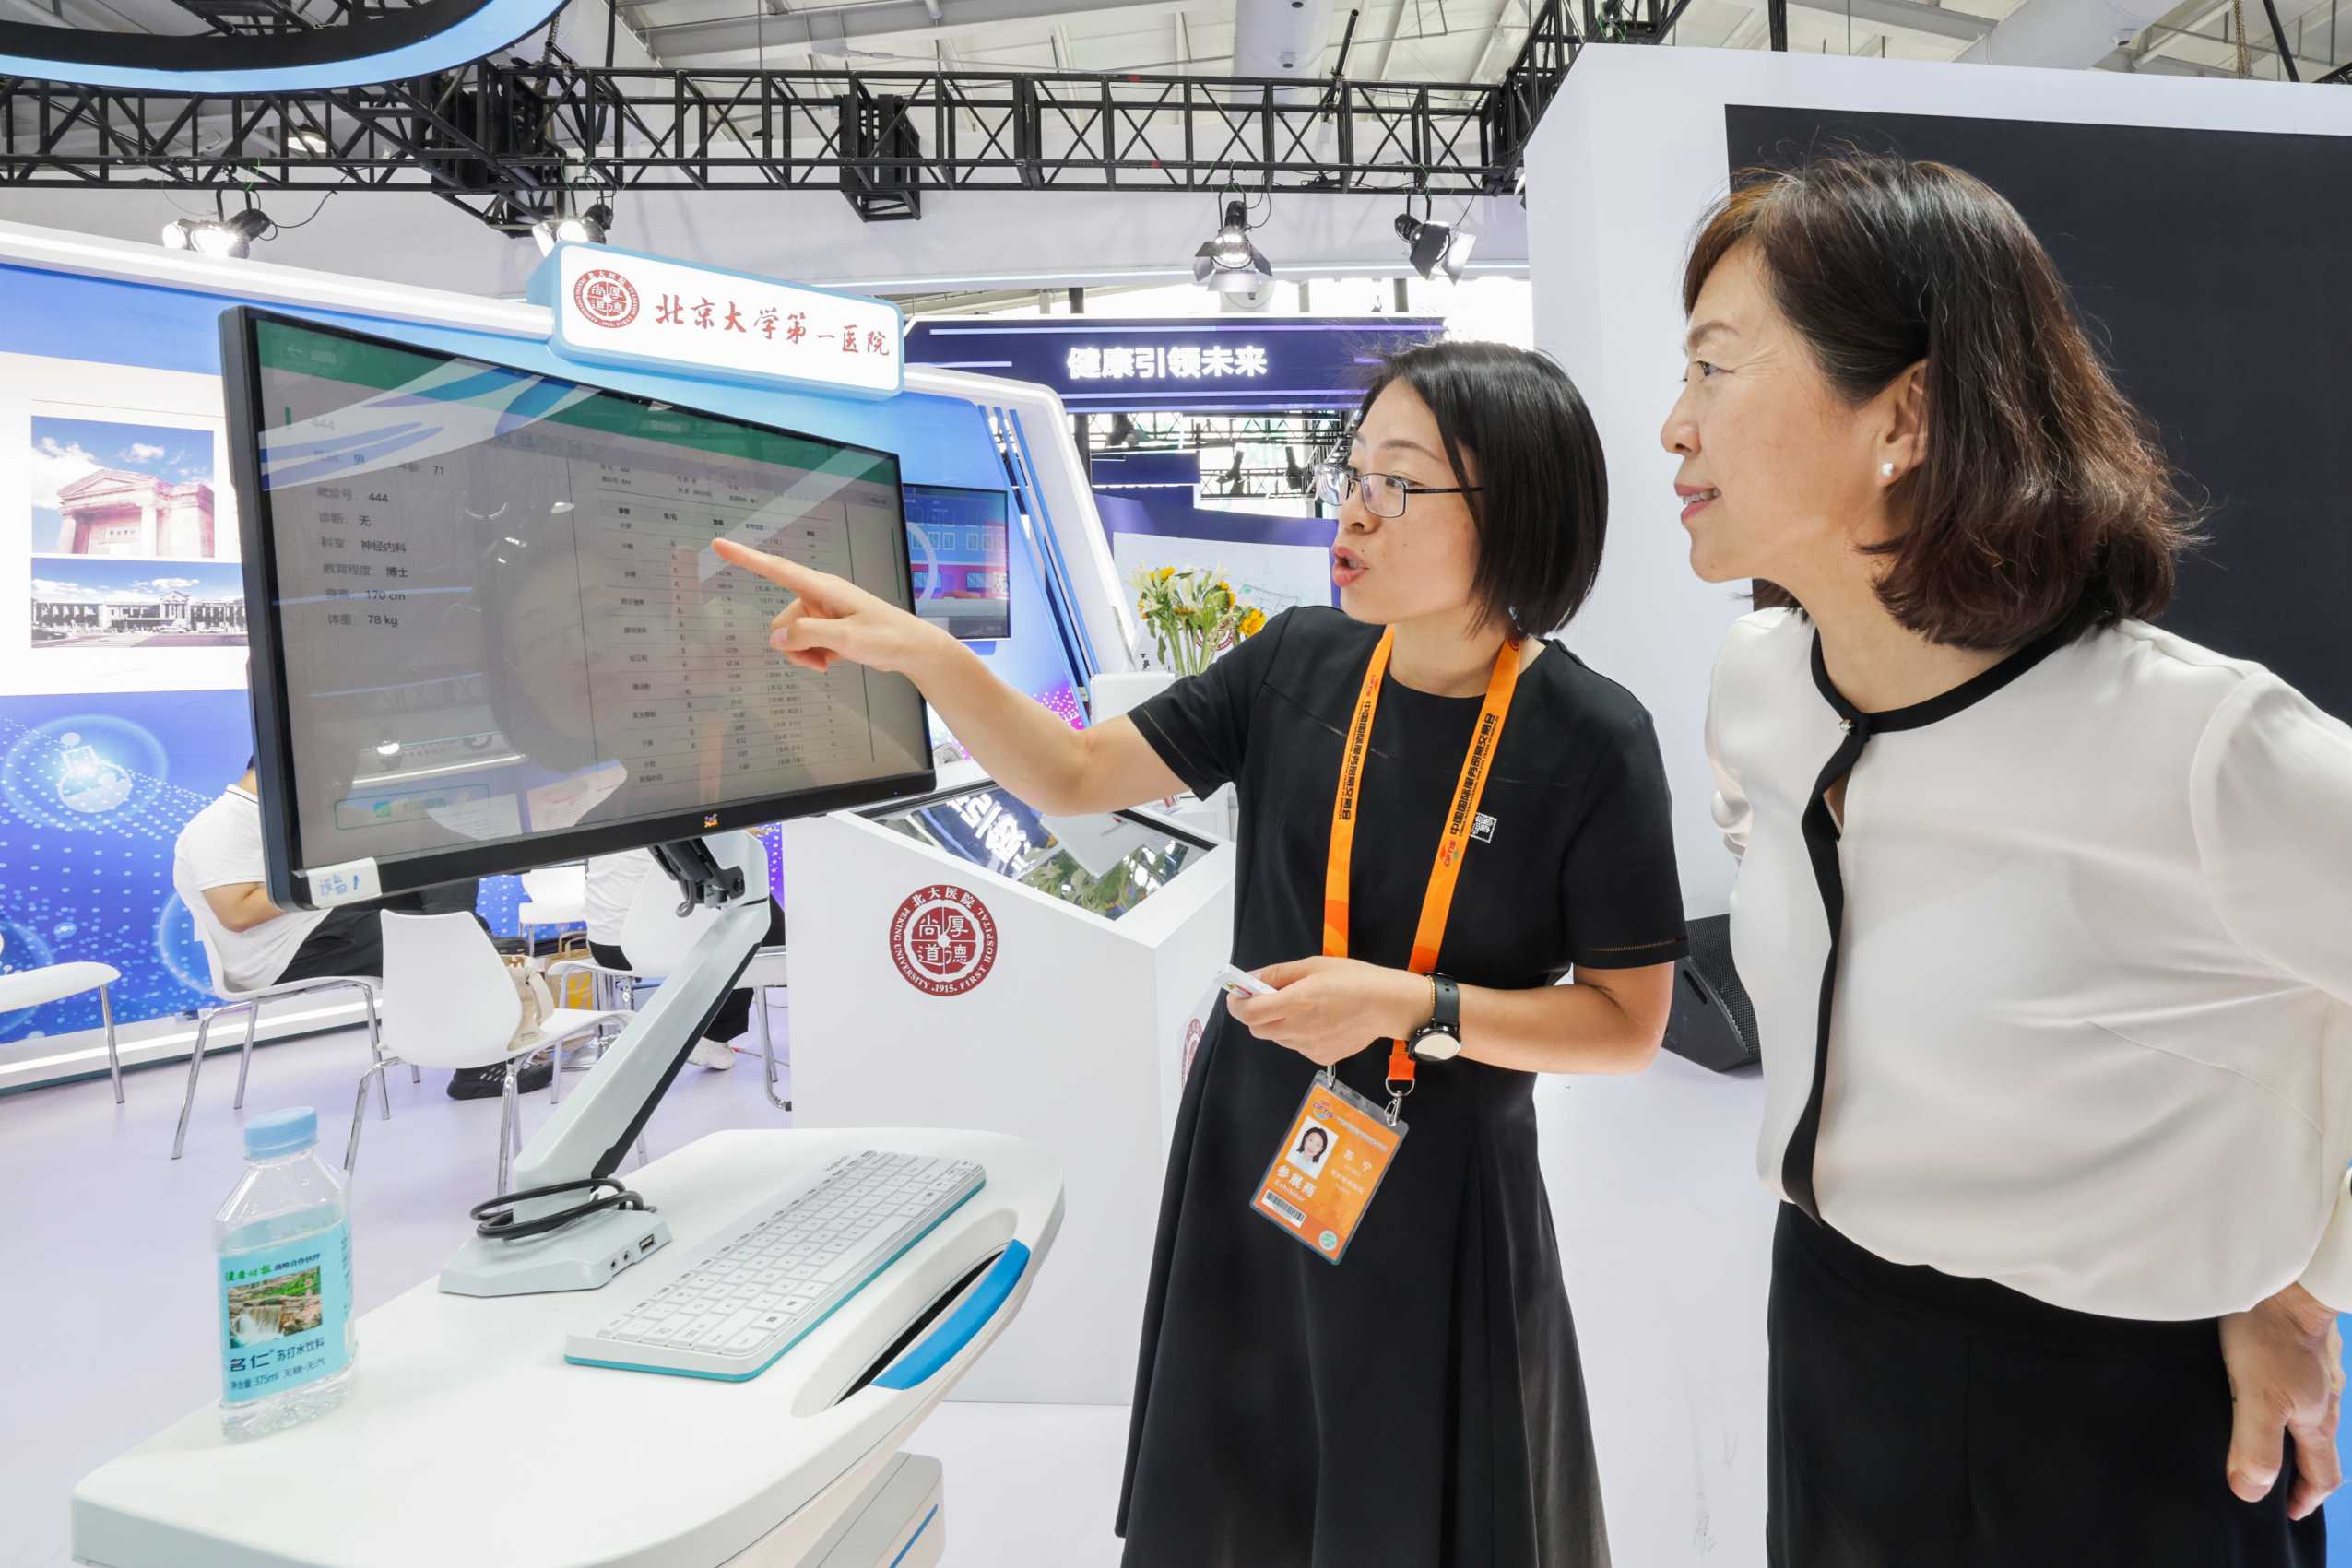 Xinhua All Media+| Mirror View of the Service Trade Fair | China's "Smart Manufacturing Services for the World"